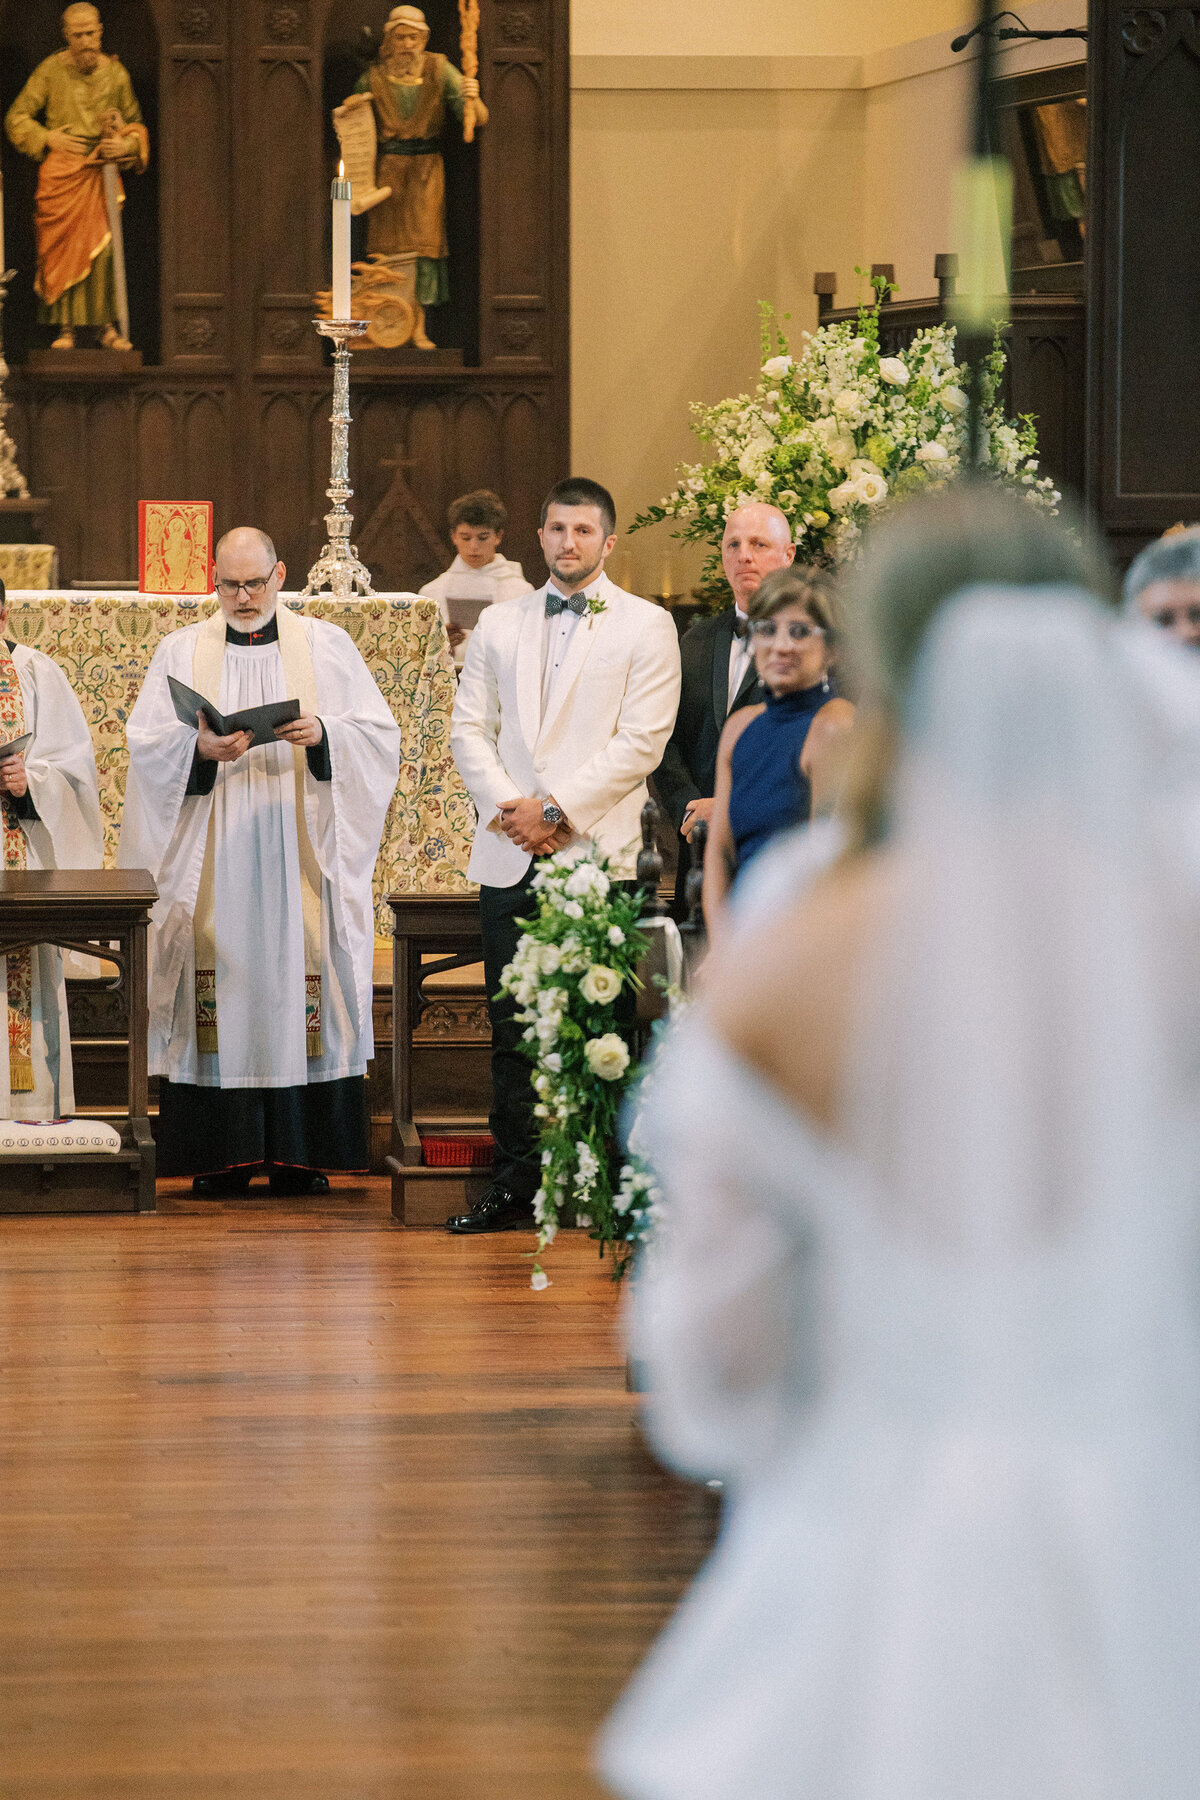 Wedding ceremony at St. Peters Anglican Church in Tallahassee FL - 3